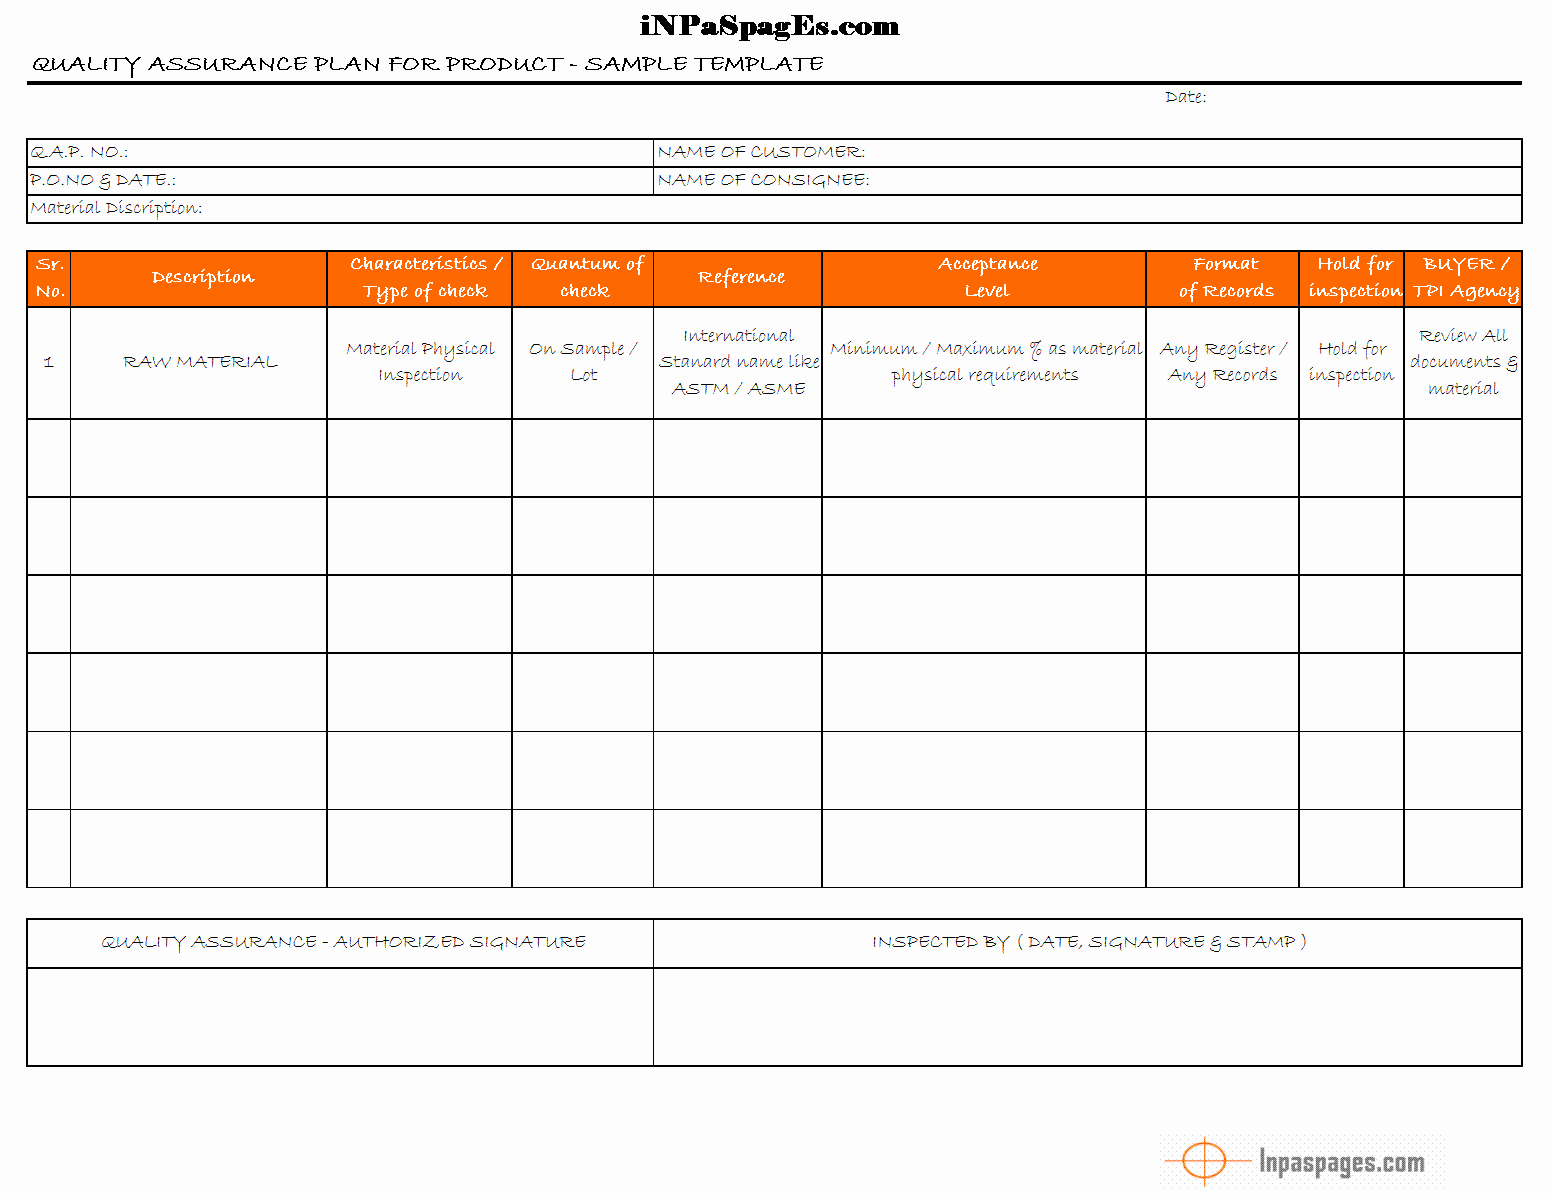 Quality assurance Reports Template Lovely Quality assurance Plan Qap